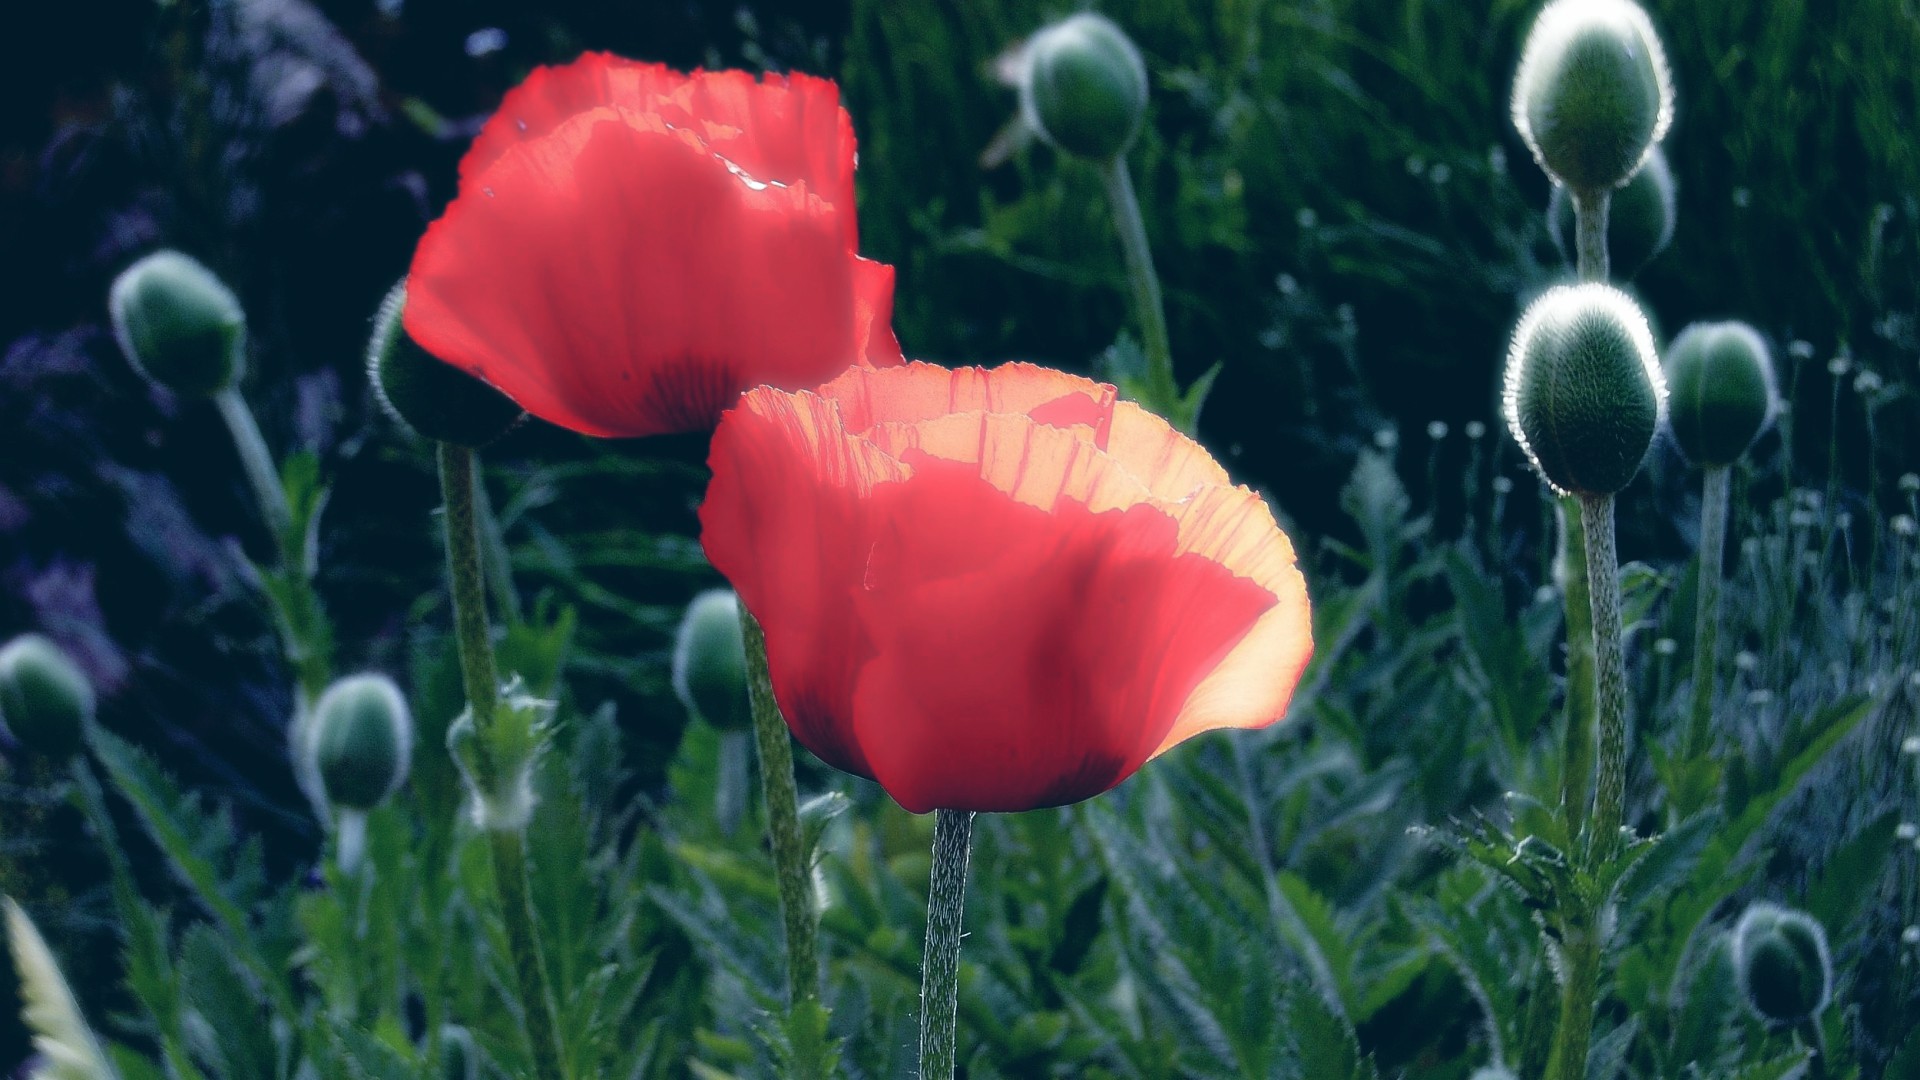 General 1920x1080 flowers poppies red flowers plants